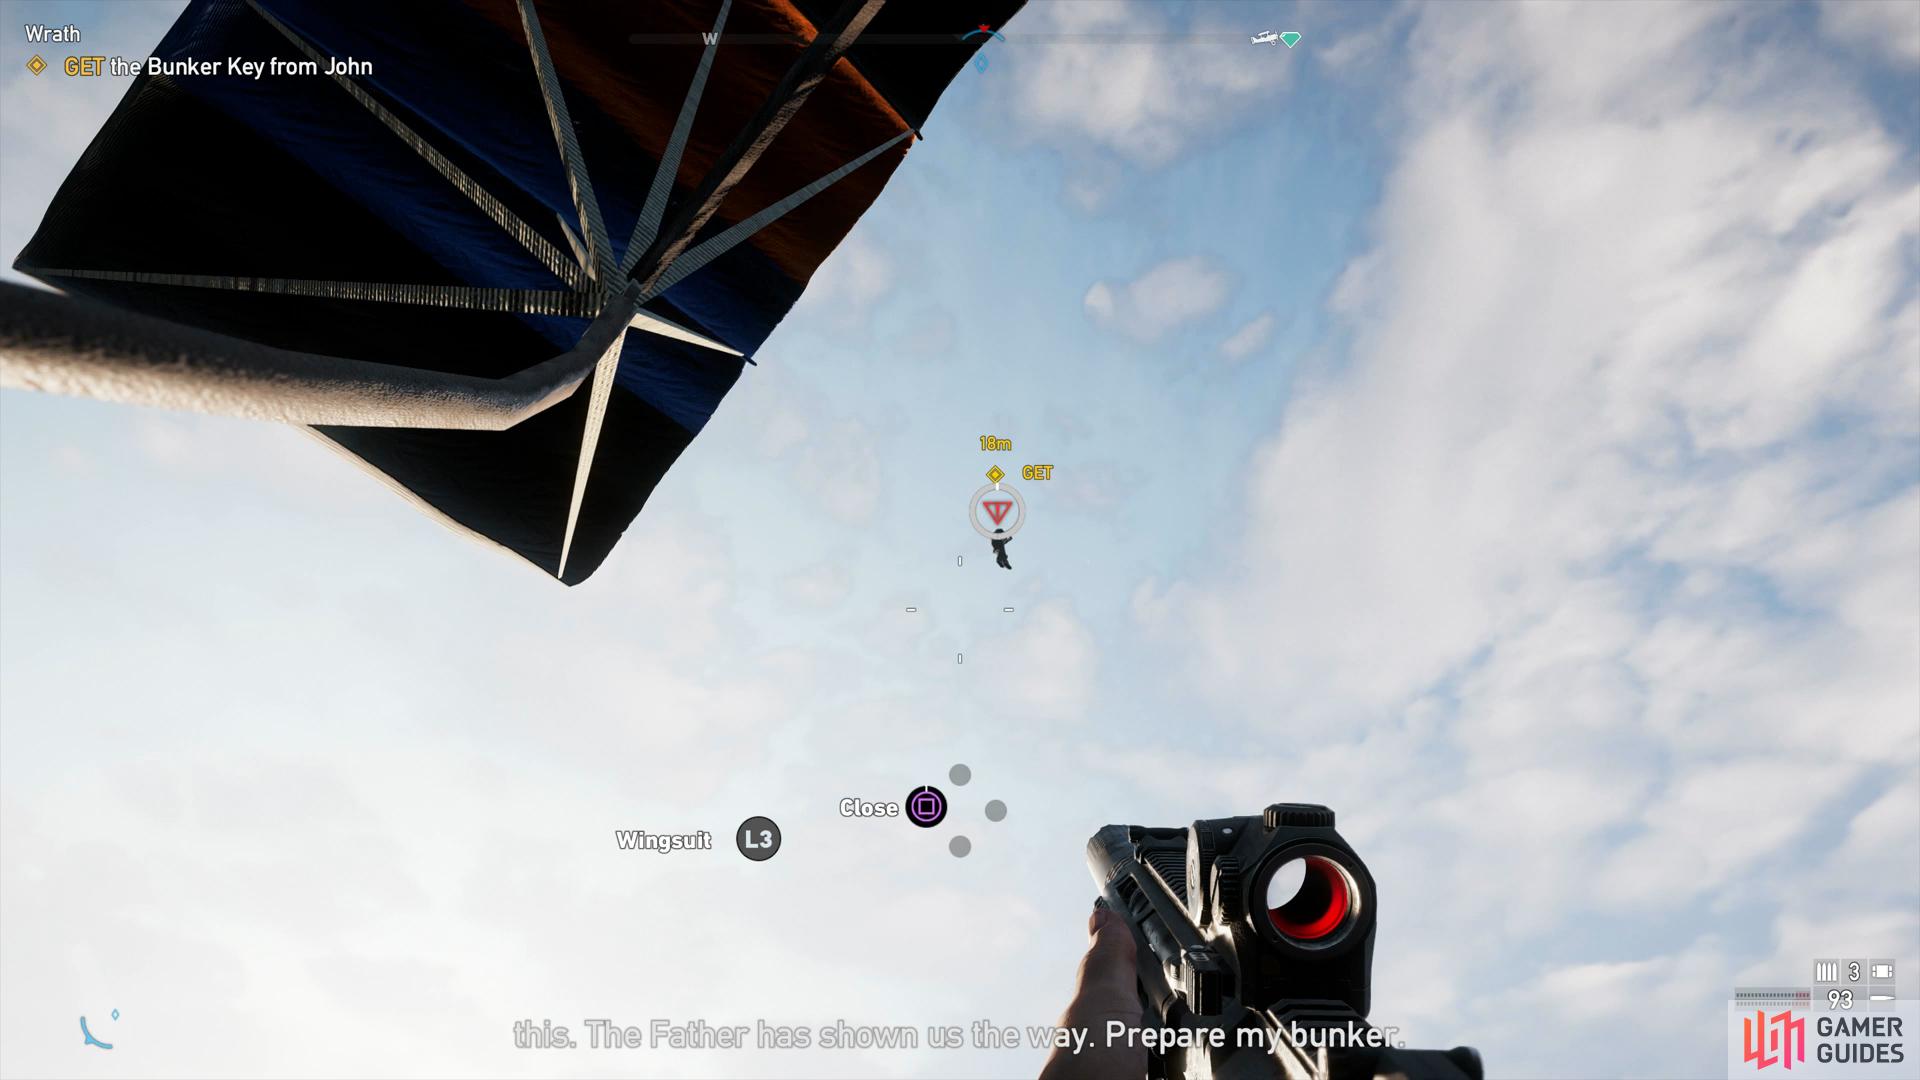 Take John out before he can even finish speaking by shooting from your parachute.